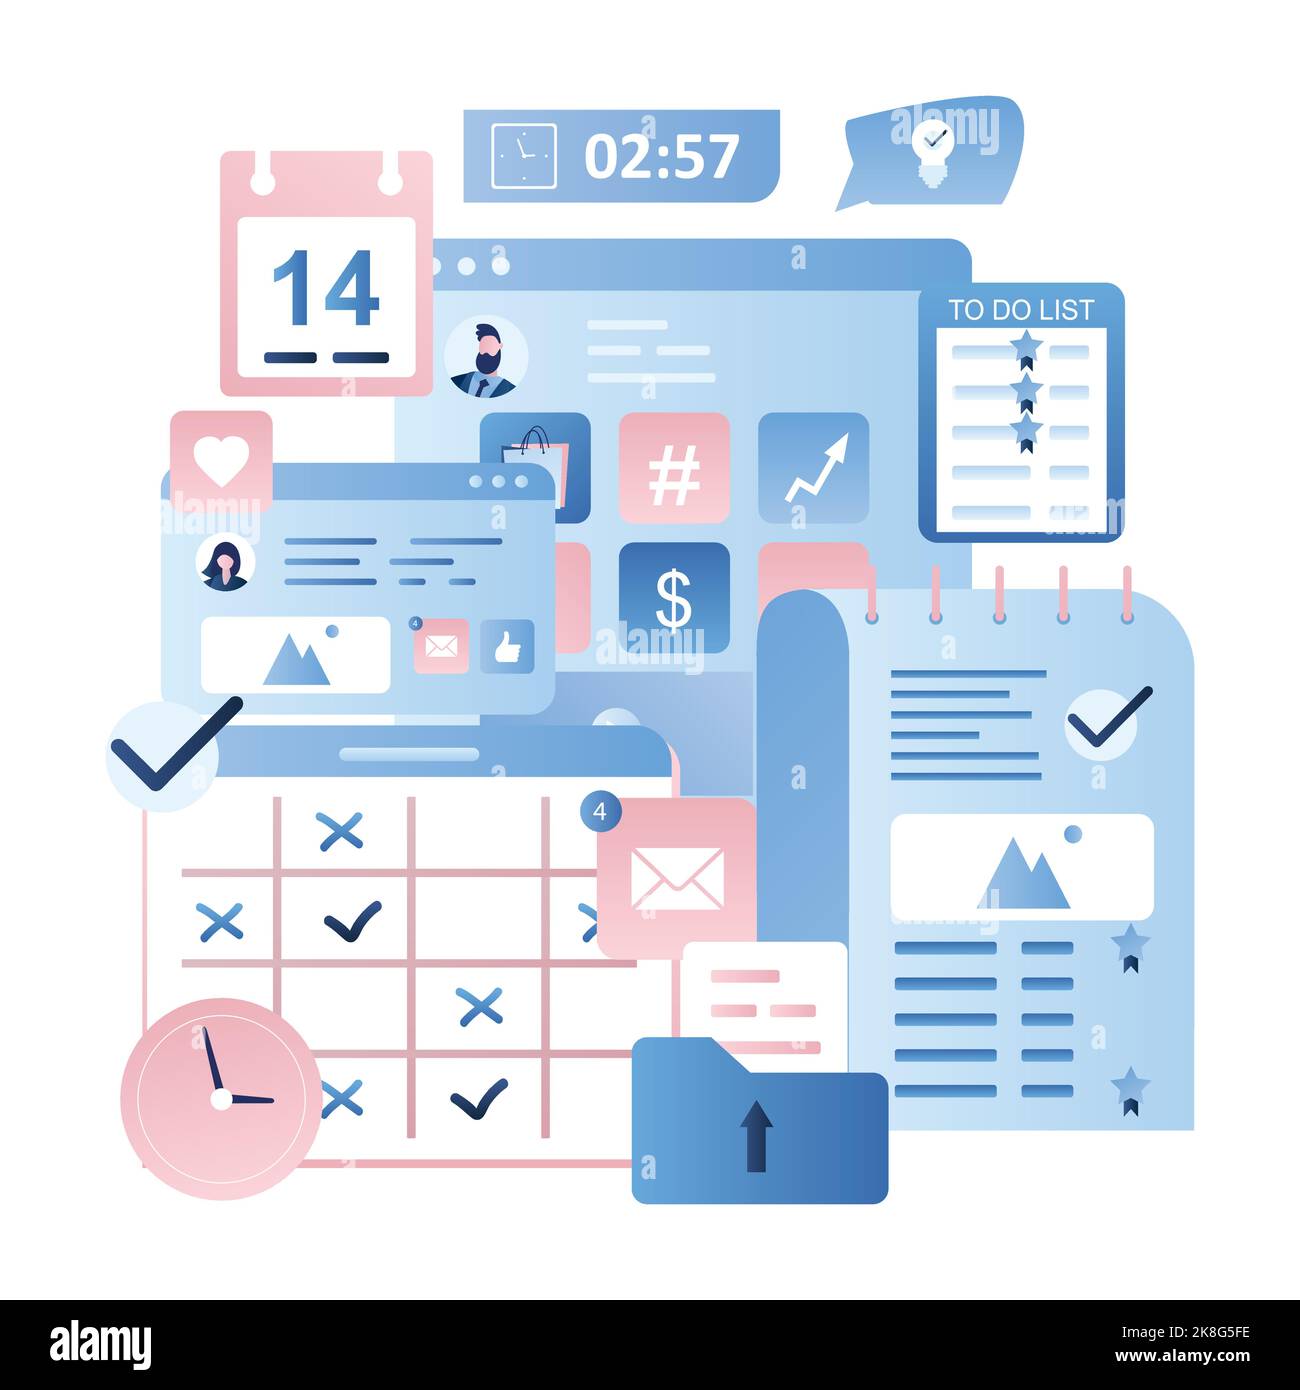 Business signs and icons. Office day and business daily planner. Schedule and to do list. Time management concept in trendy style. Isolated on white b Stock Vector